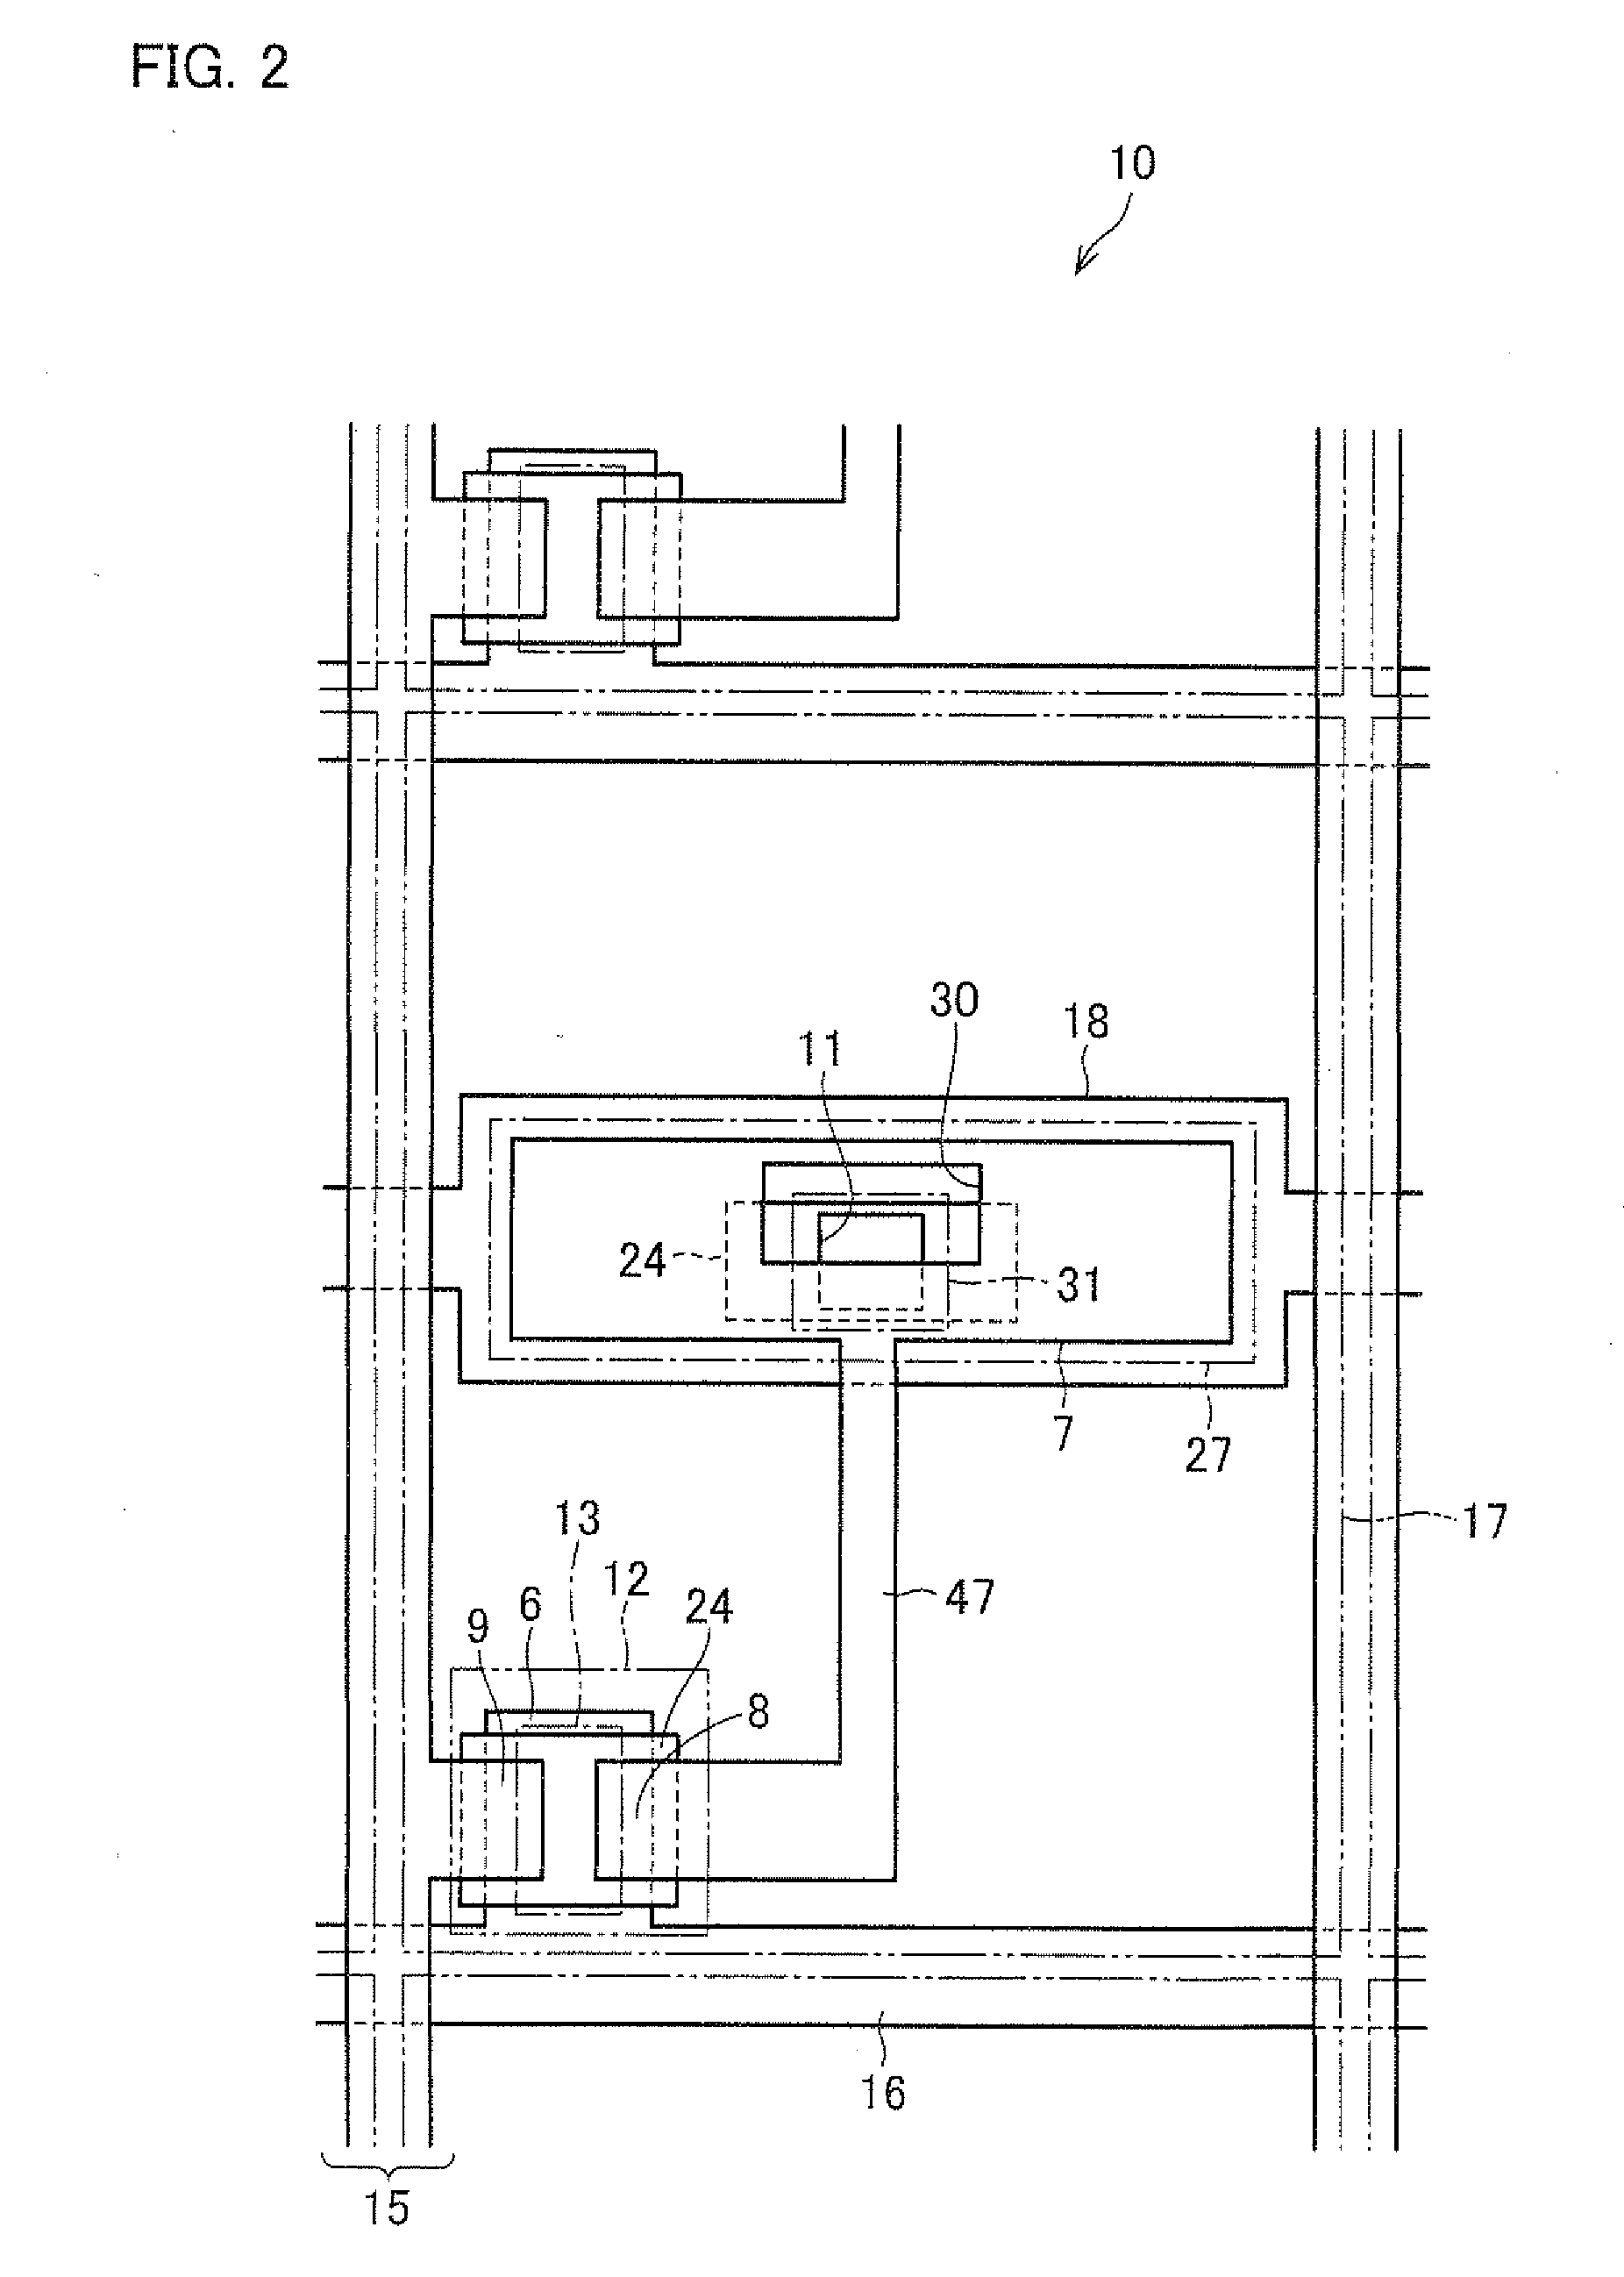 Active matrix substrate, display device, and television receiver